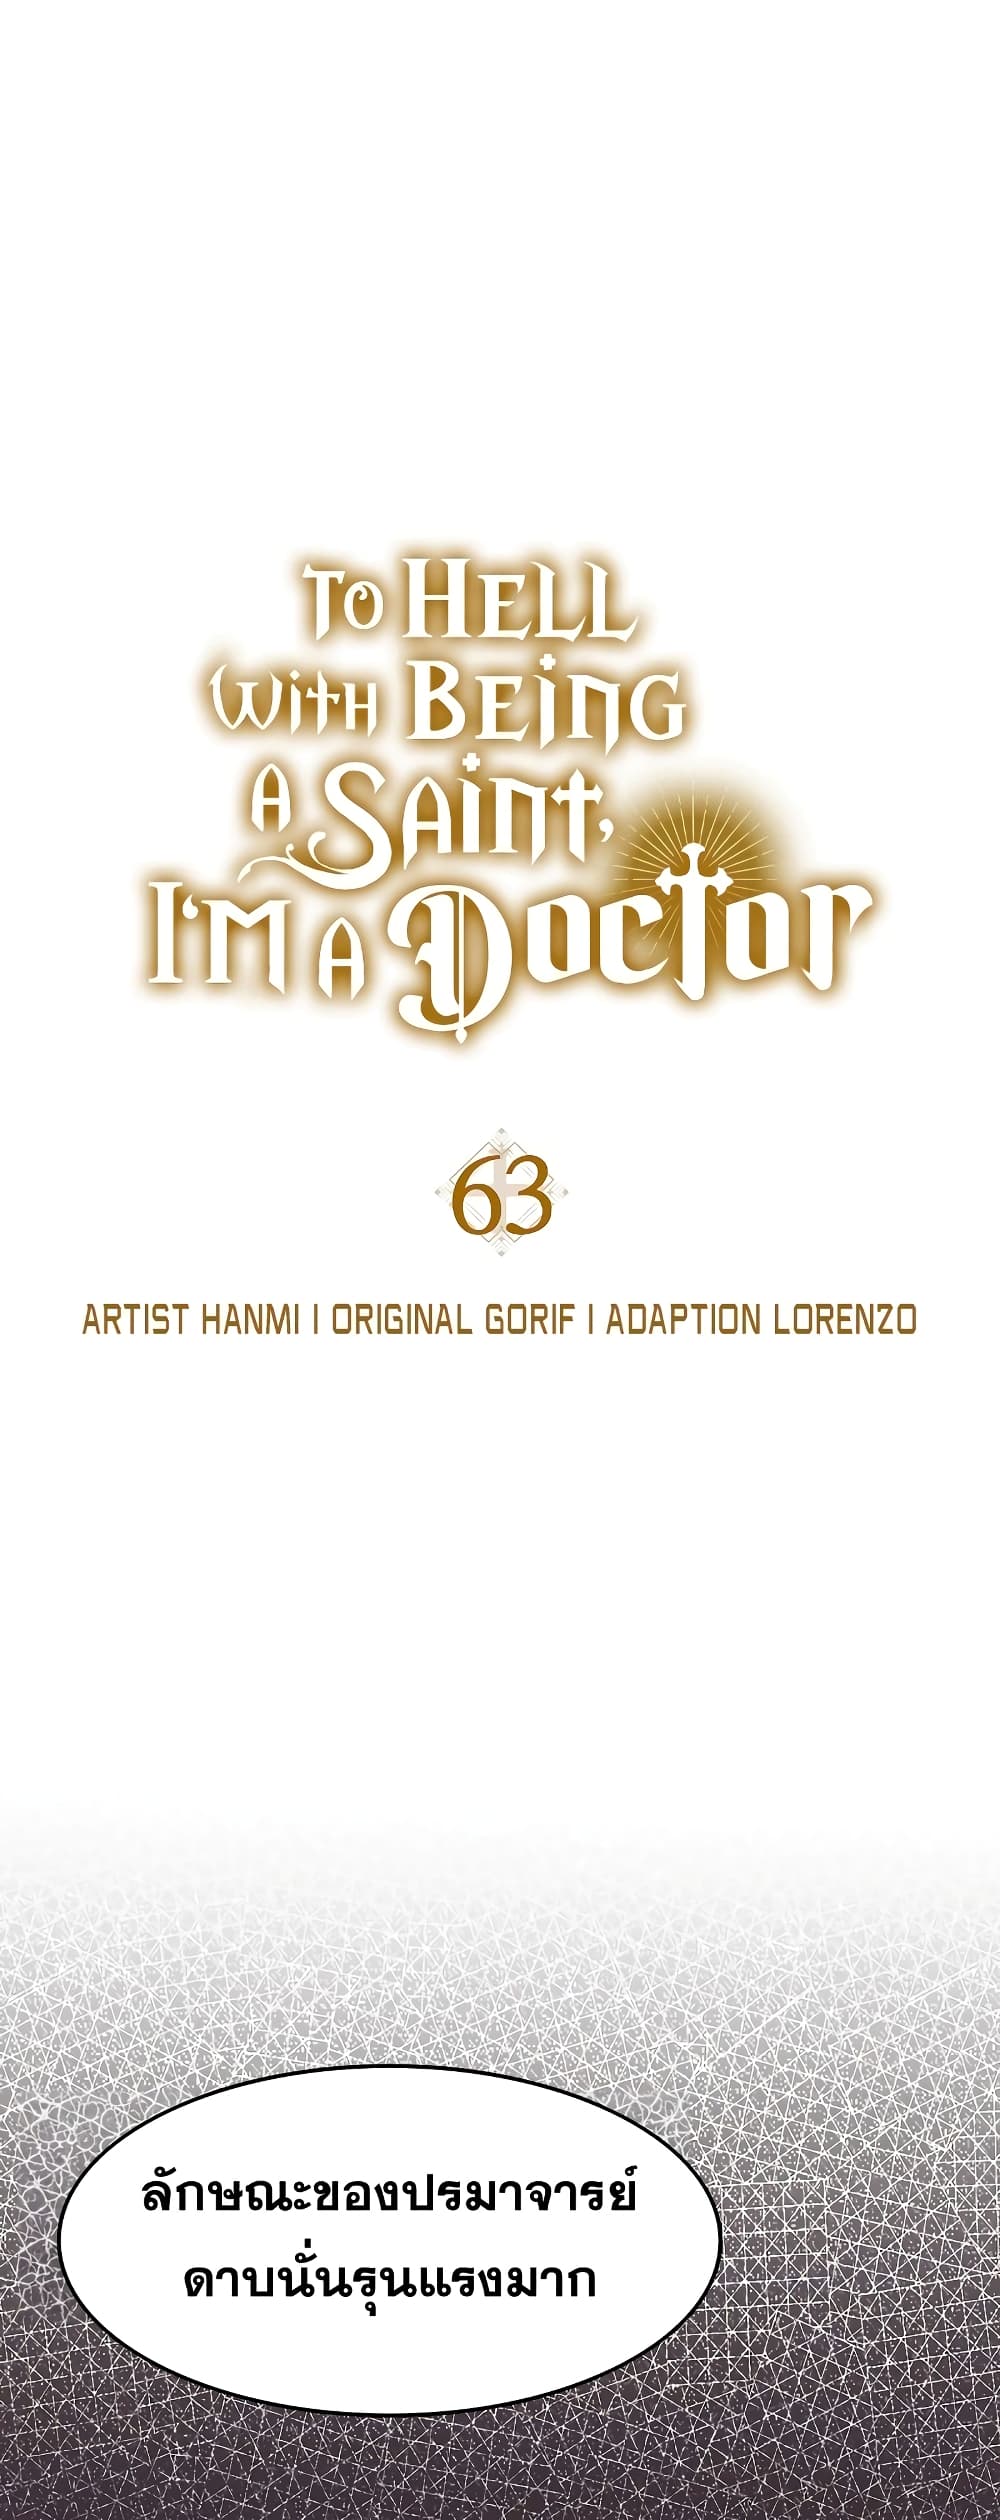 To Hell With Being A Saint, I’m A Doctor 63-63